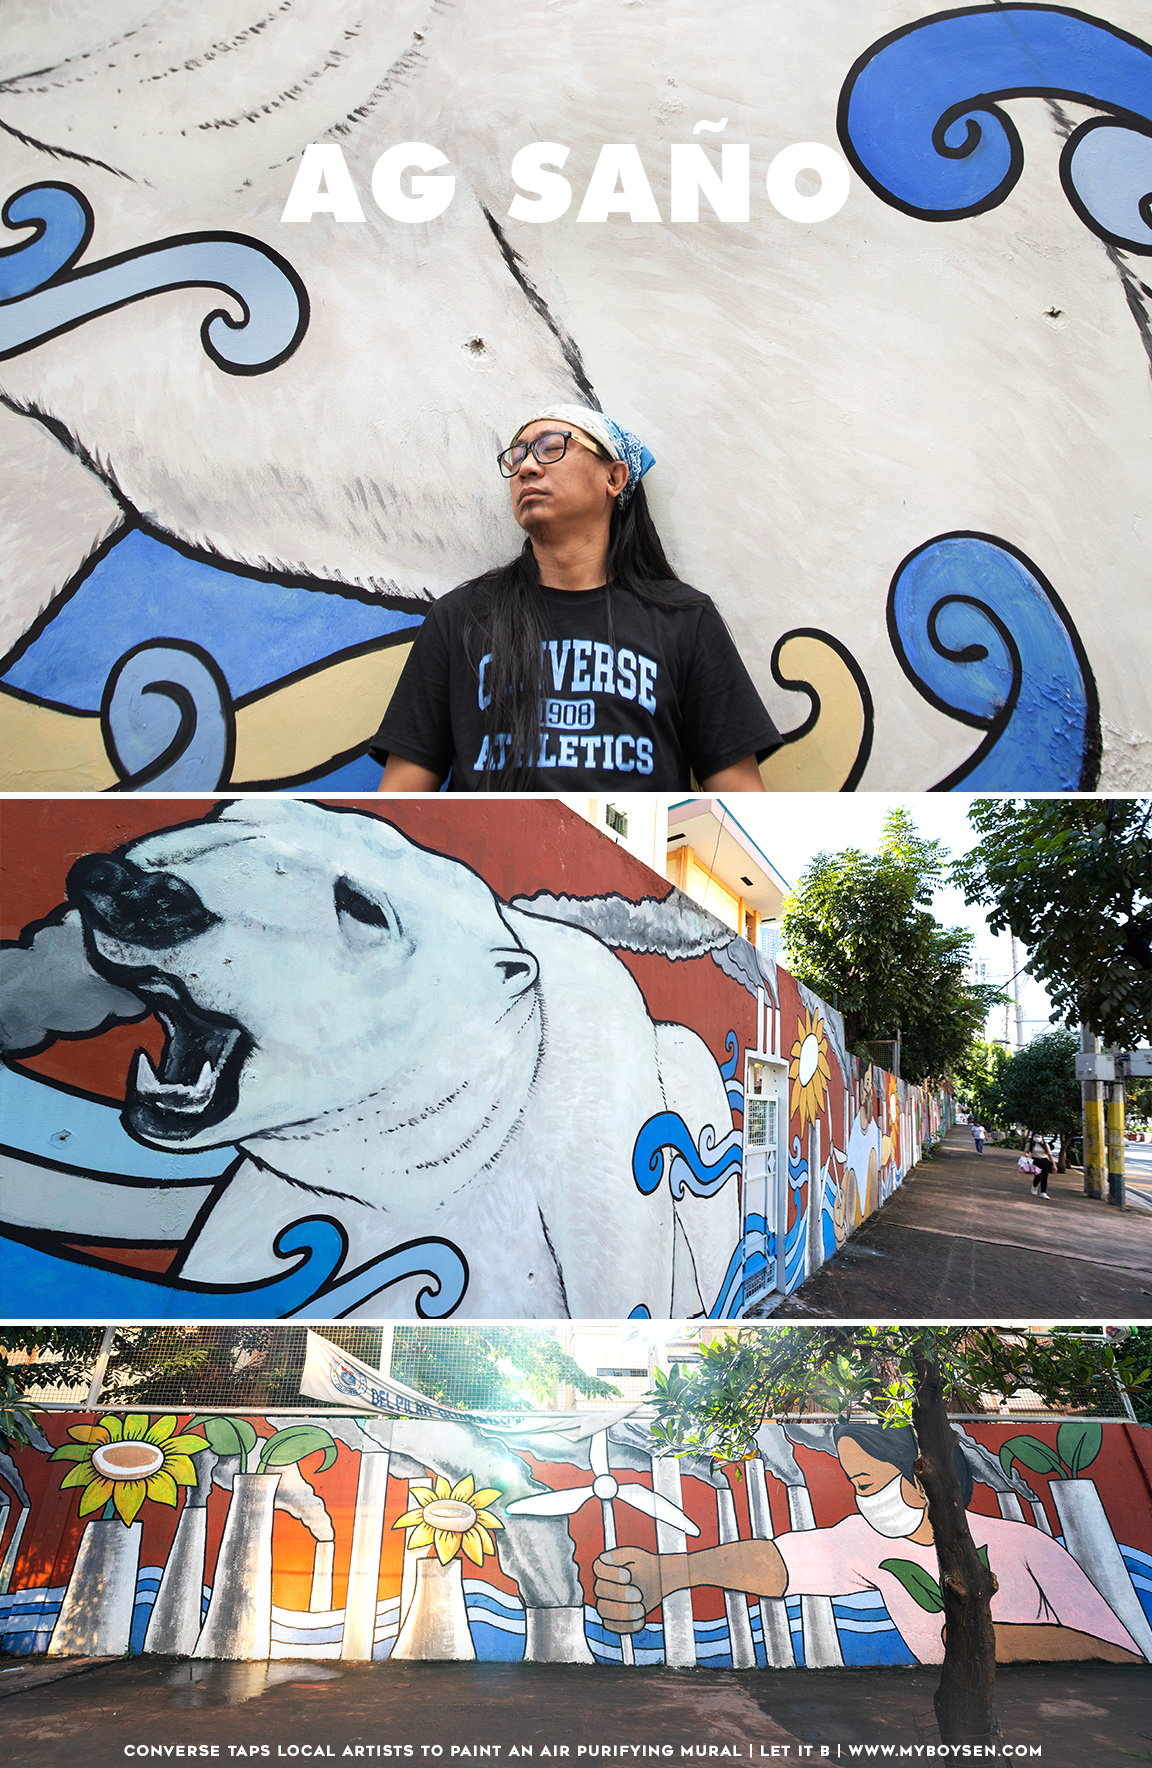 Converse Taps Local Artists to Paint an Air Purifying Mural | MyBoysen